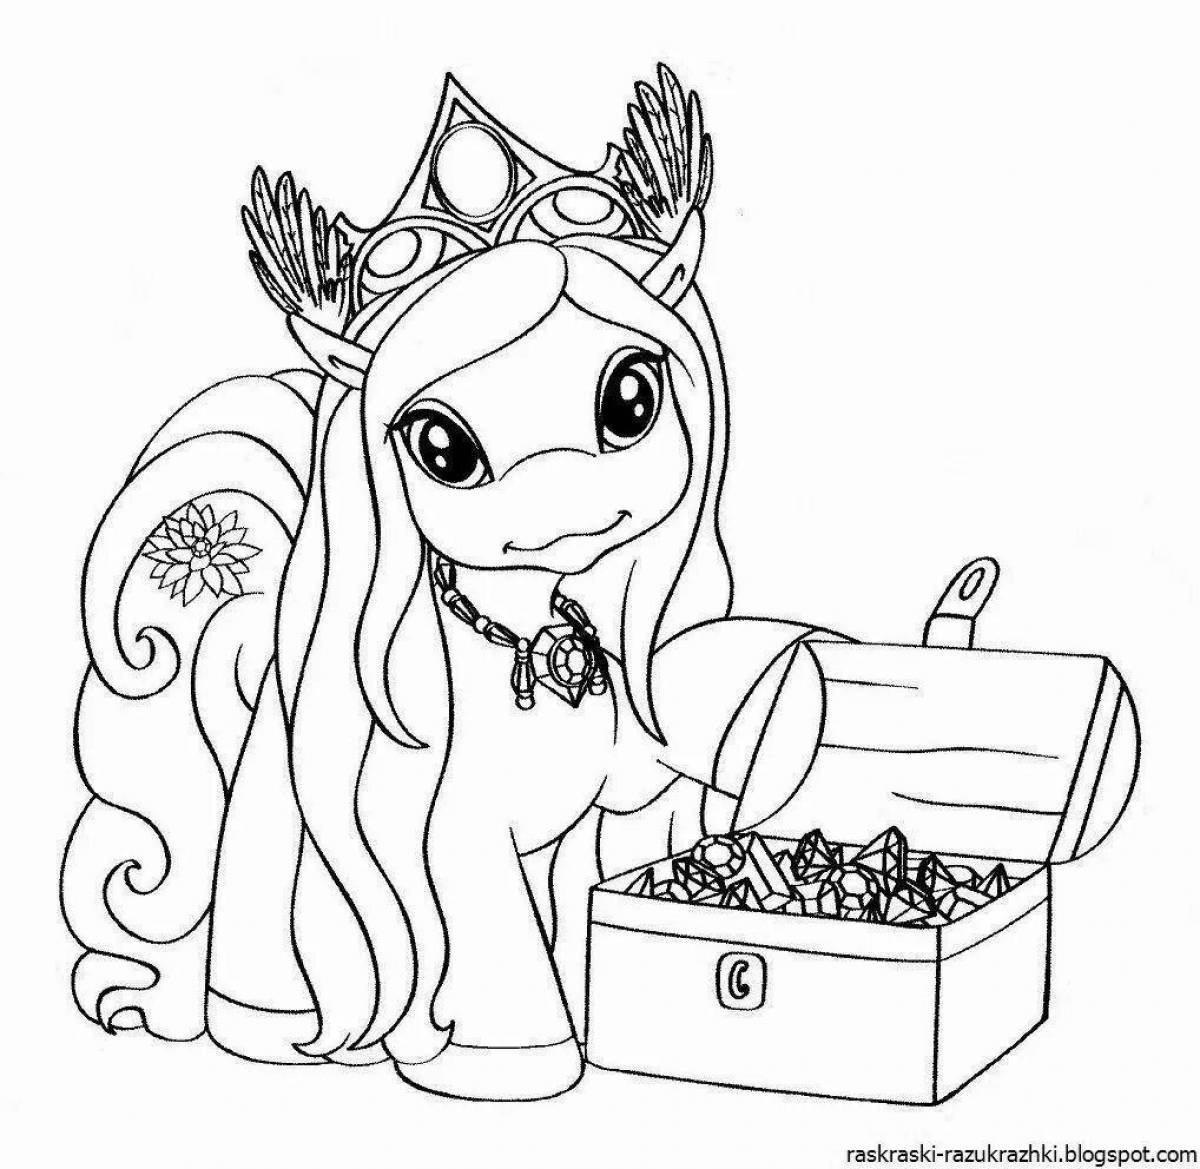 Dazzling coloring book for girls 7 years old unicorn